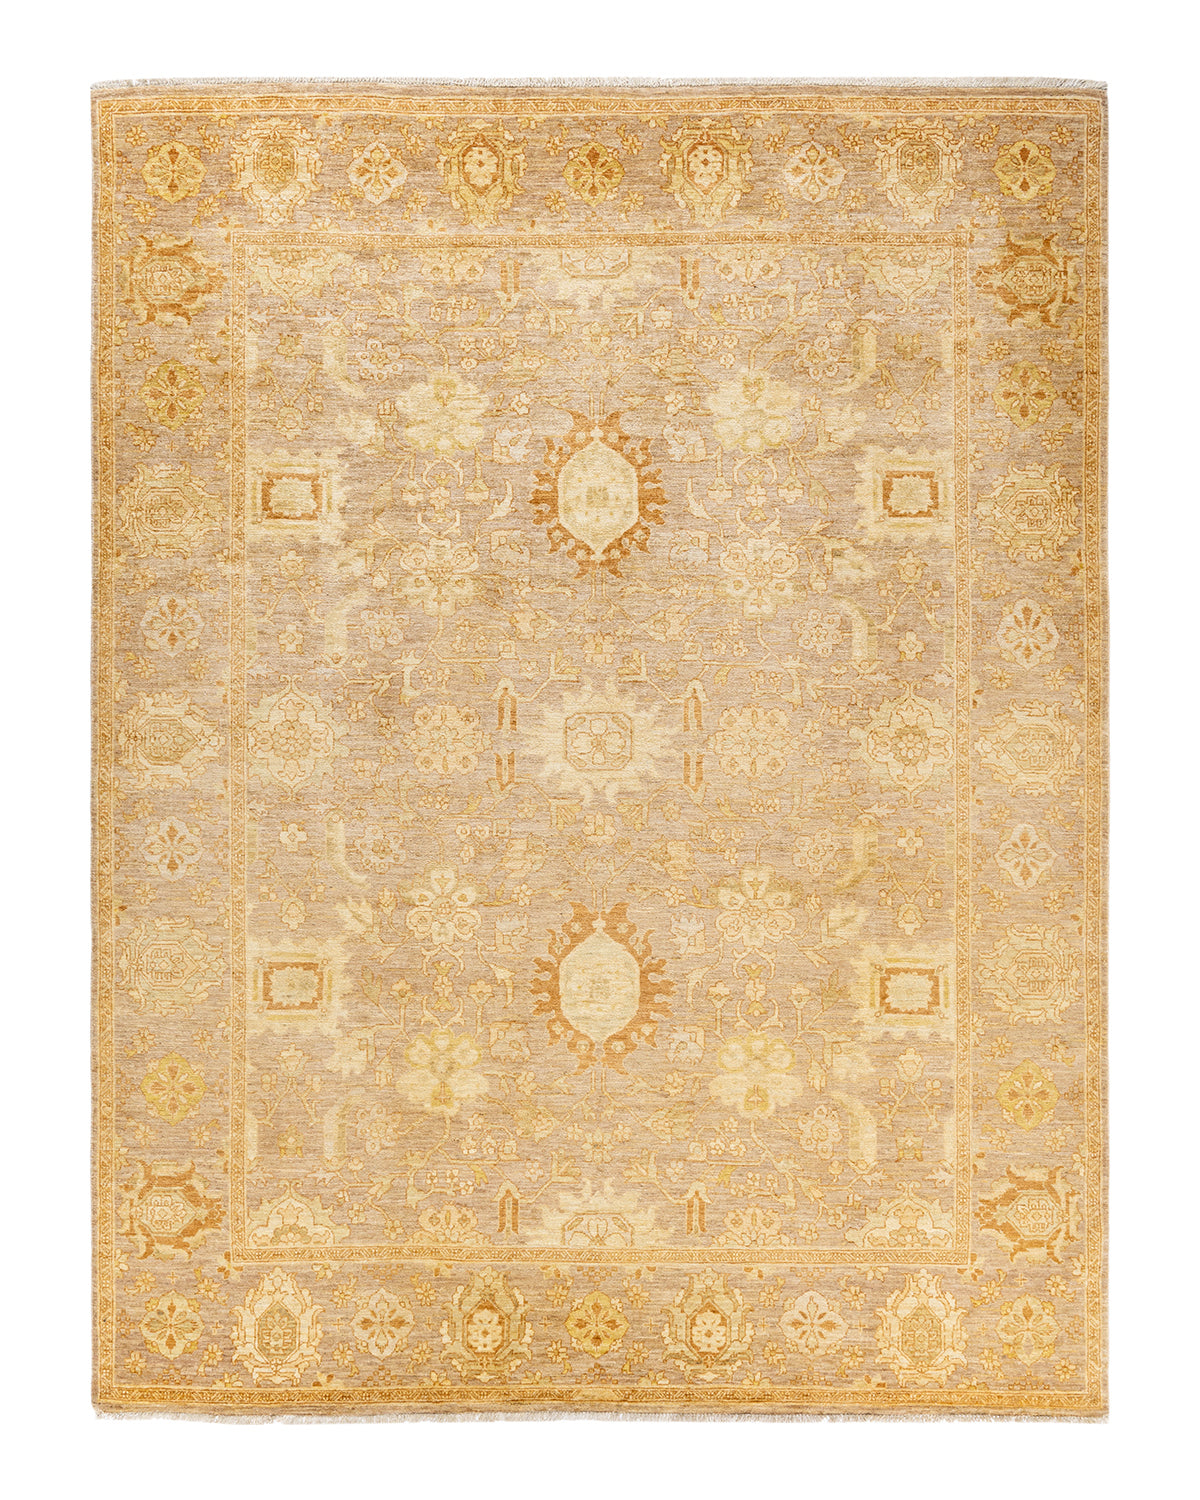 Eclectic, One-of-a-Kind Hand-Knotted Area Rug  - Yellow,  8' 0" x 10' 6"